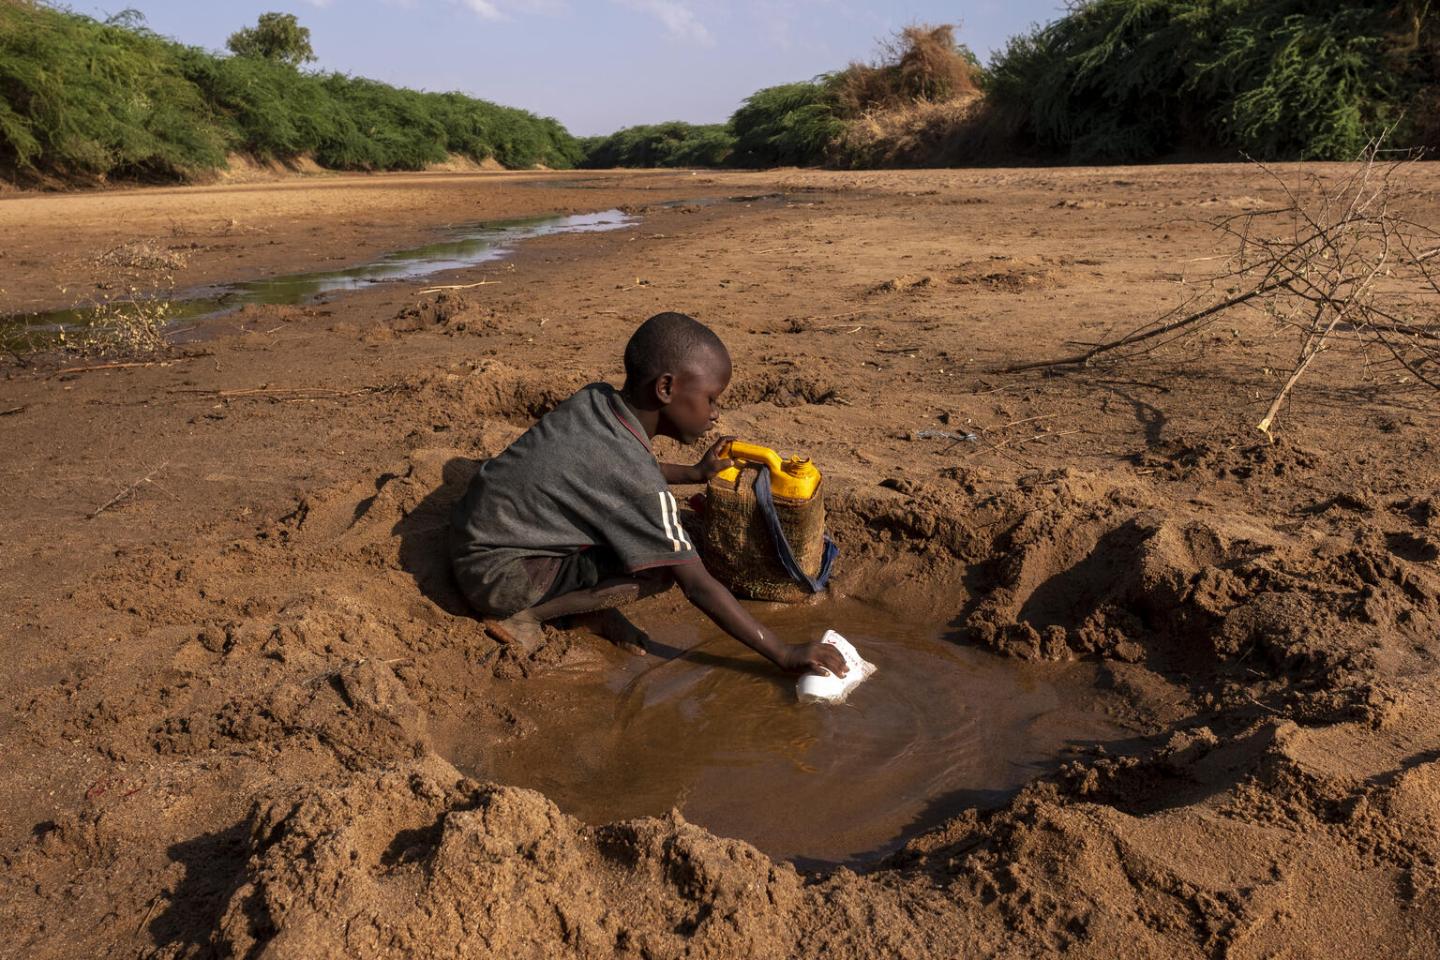 Children suffering dire drought across parts of Africa are 'one disease  away from catastrophe' – warns UNICEF